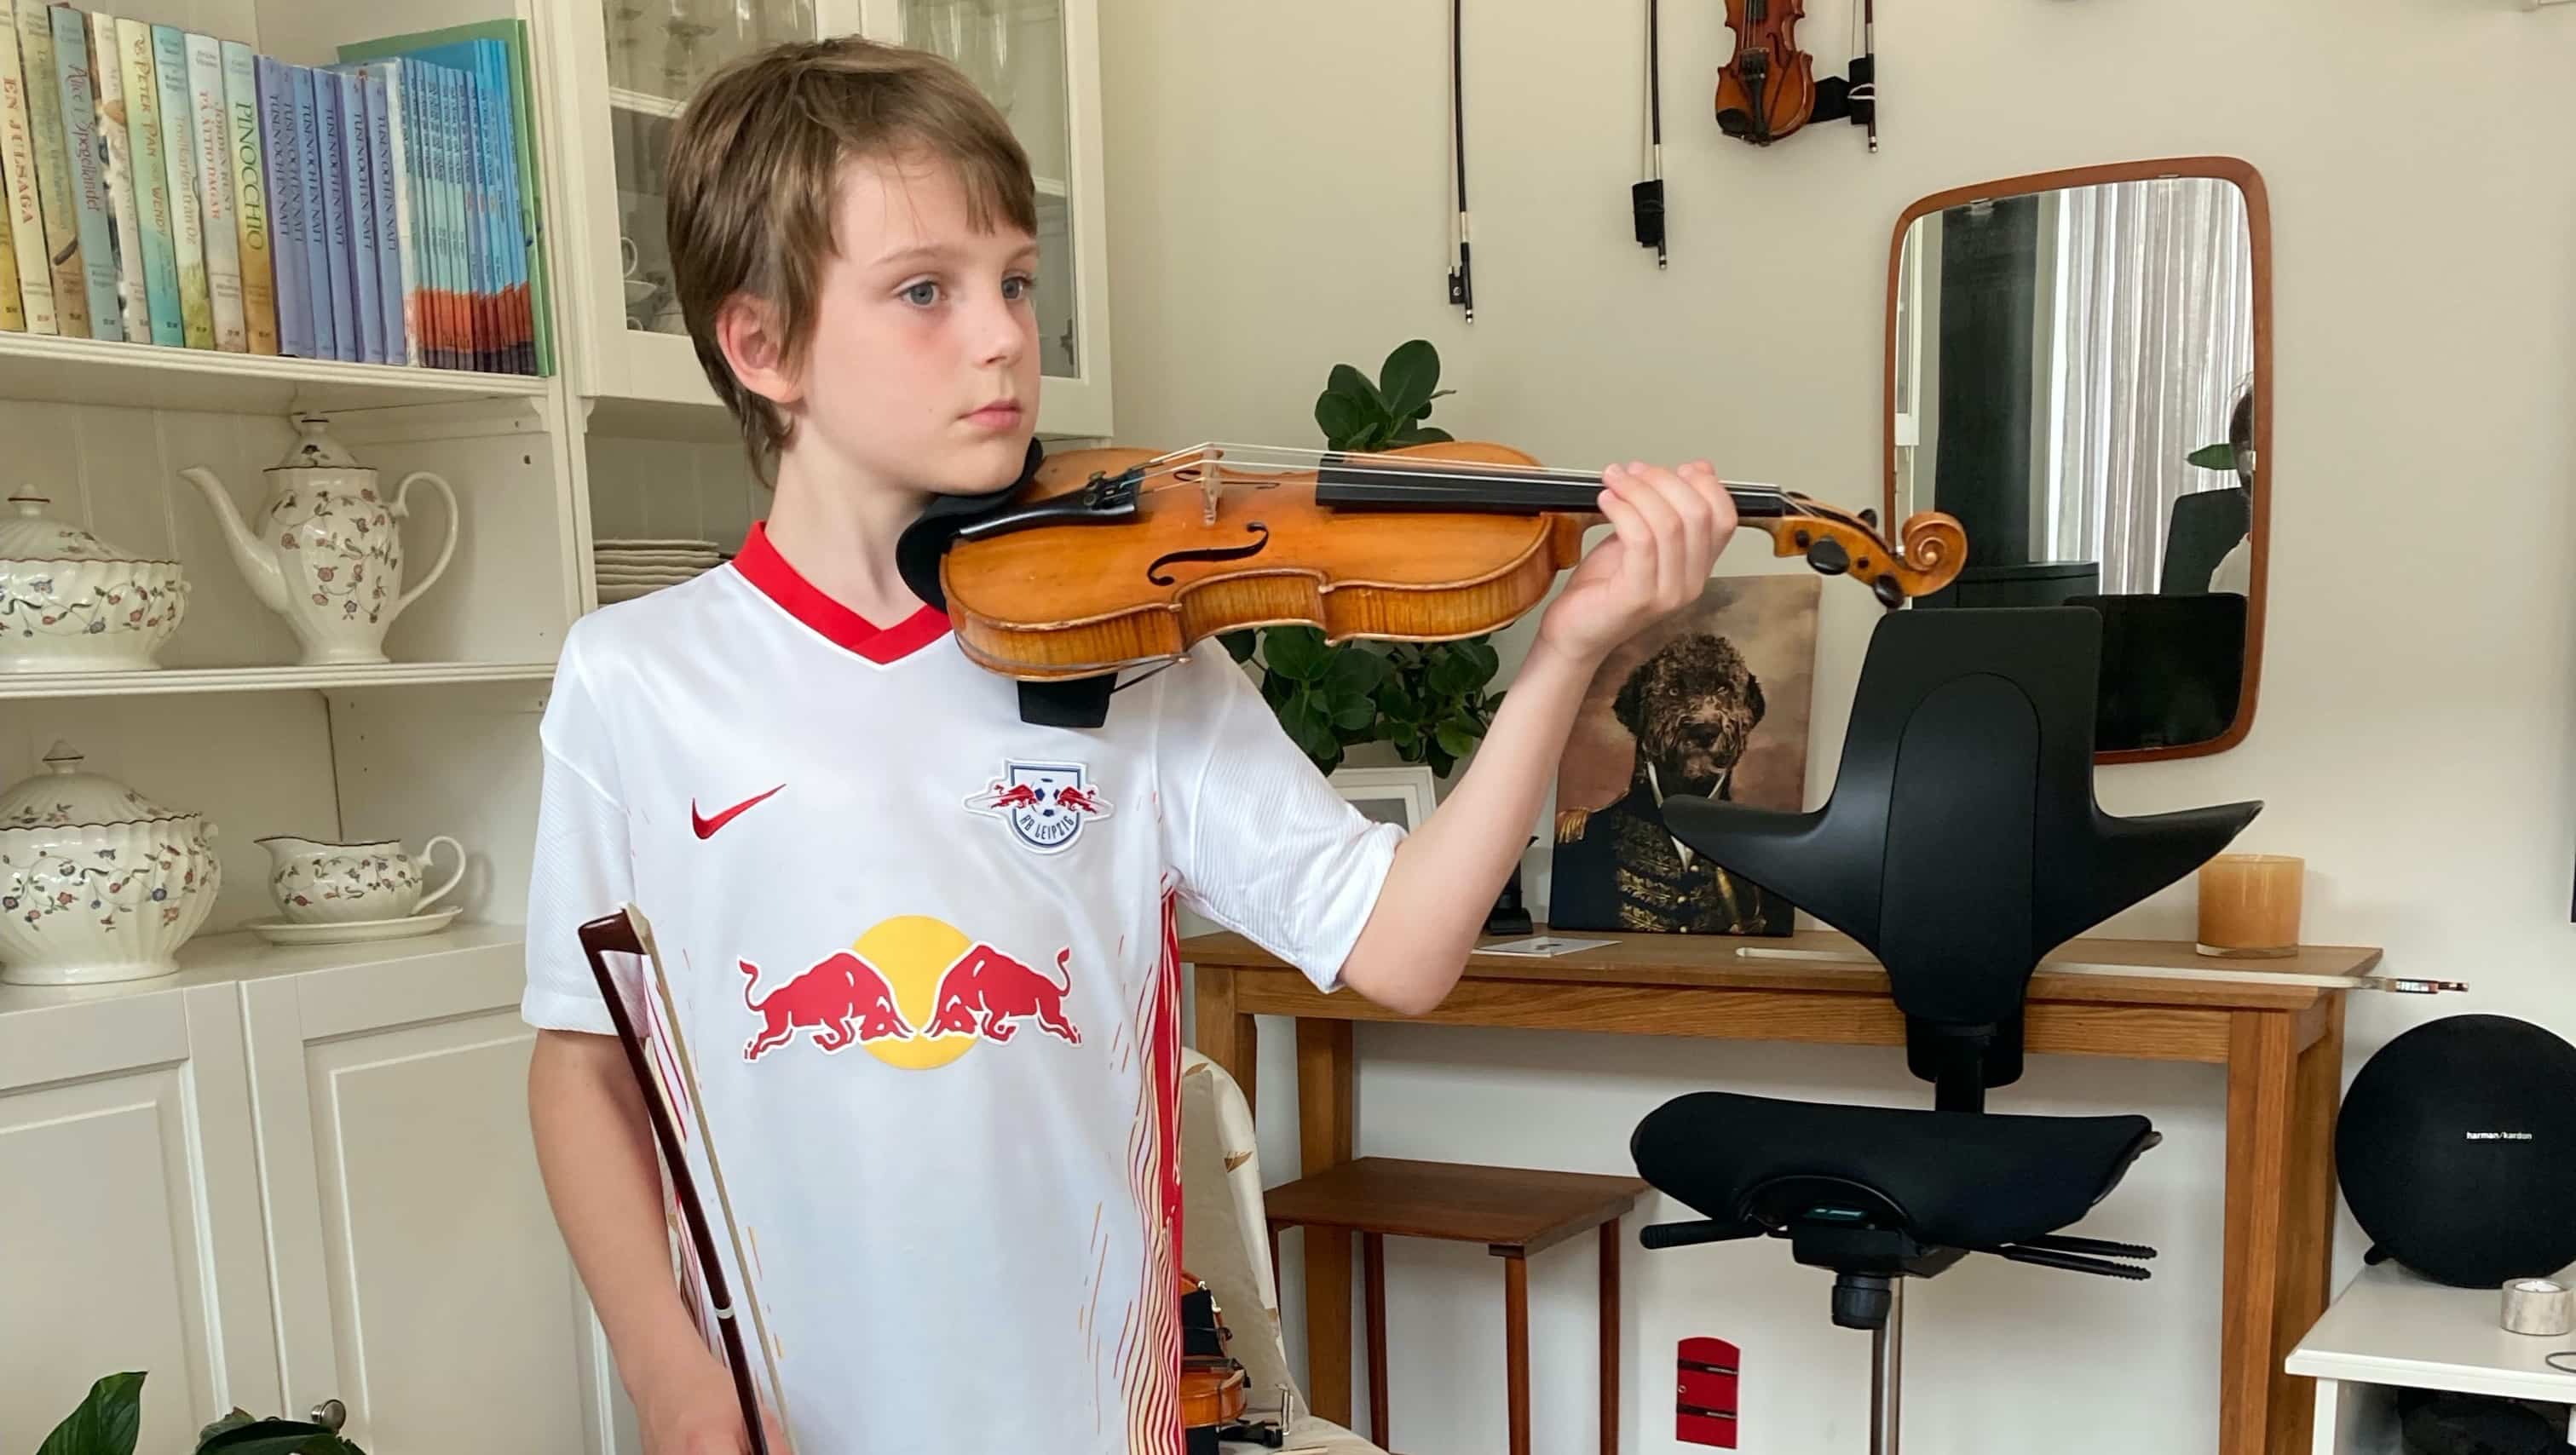 A promising violinist needs a life-saving operation